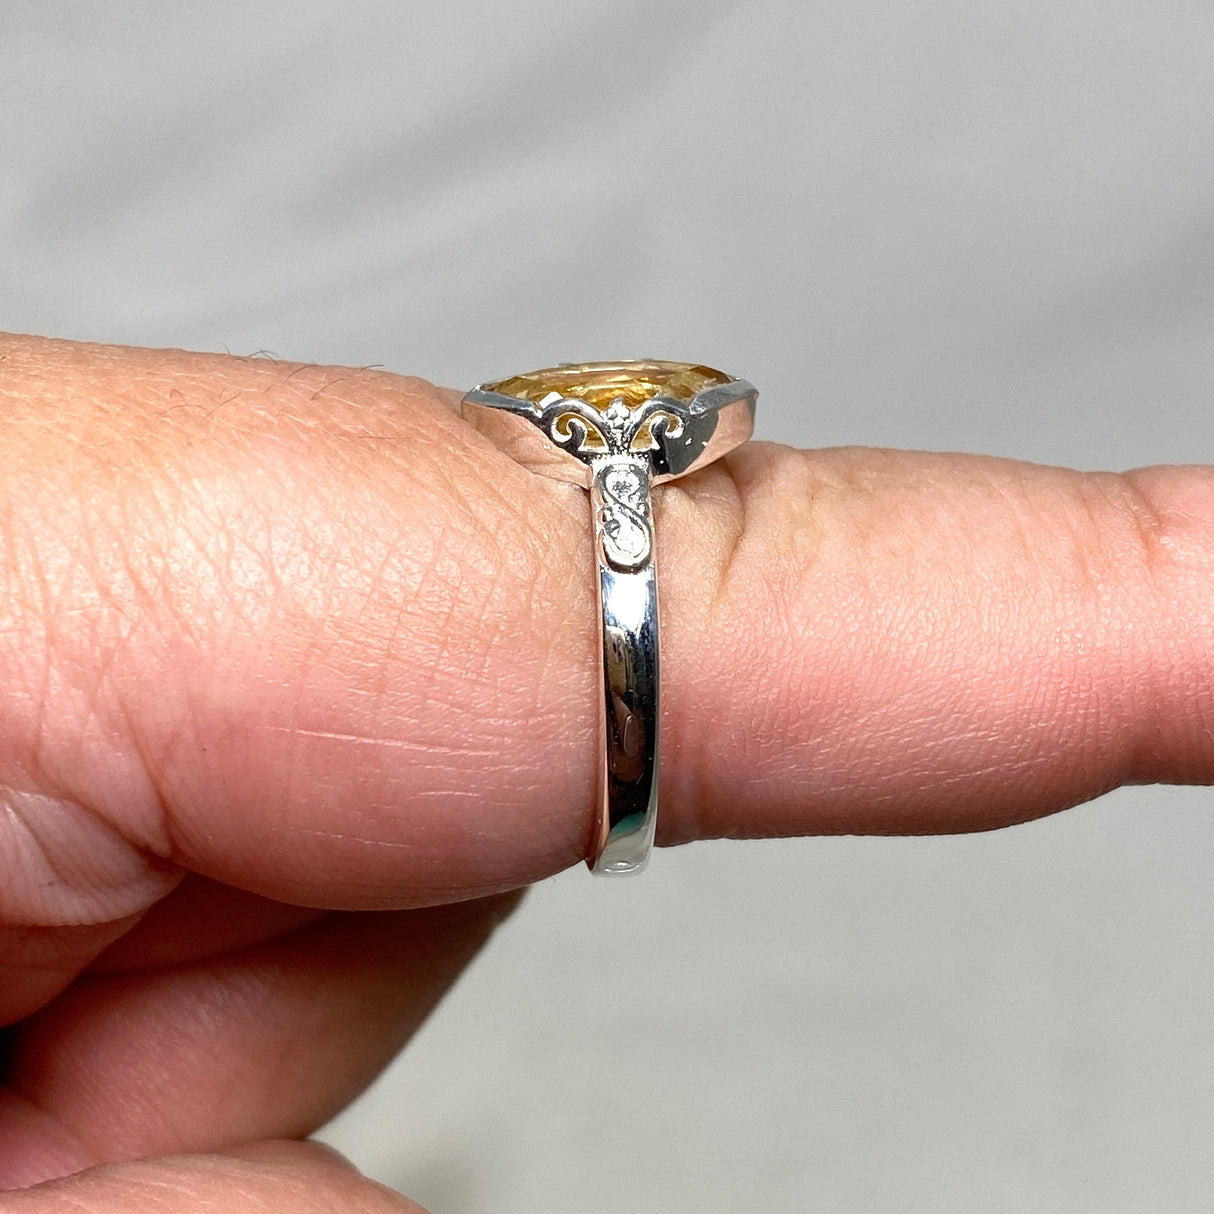 Citrine Faceted Marquise Ring in a Decorative Setting R3726 - Nature's Magick